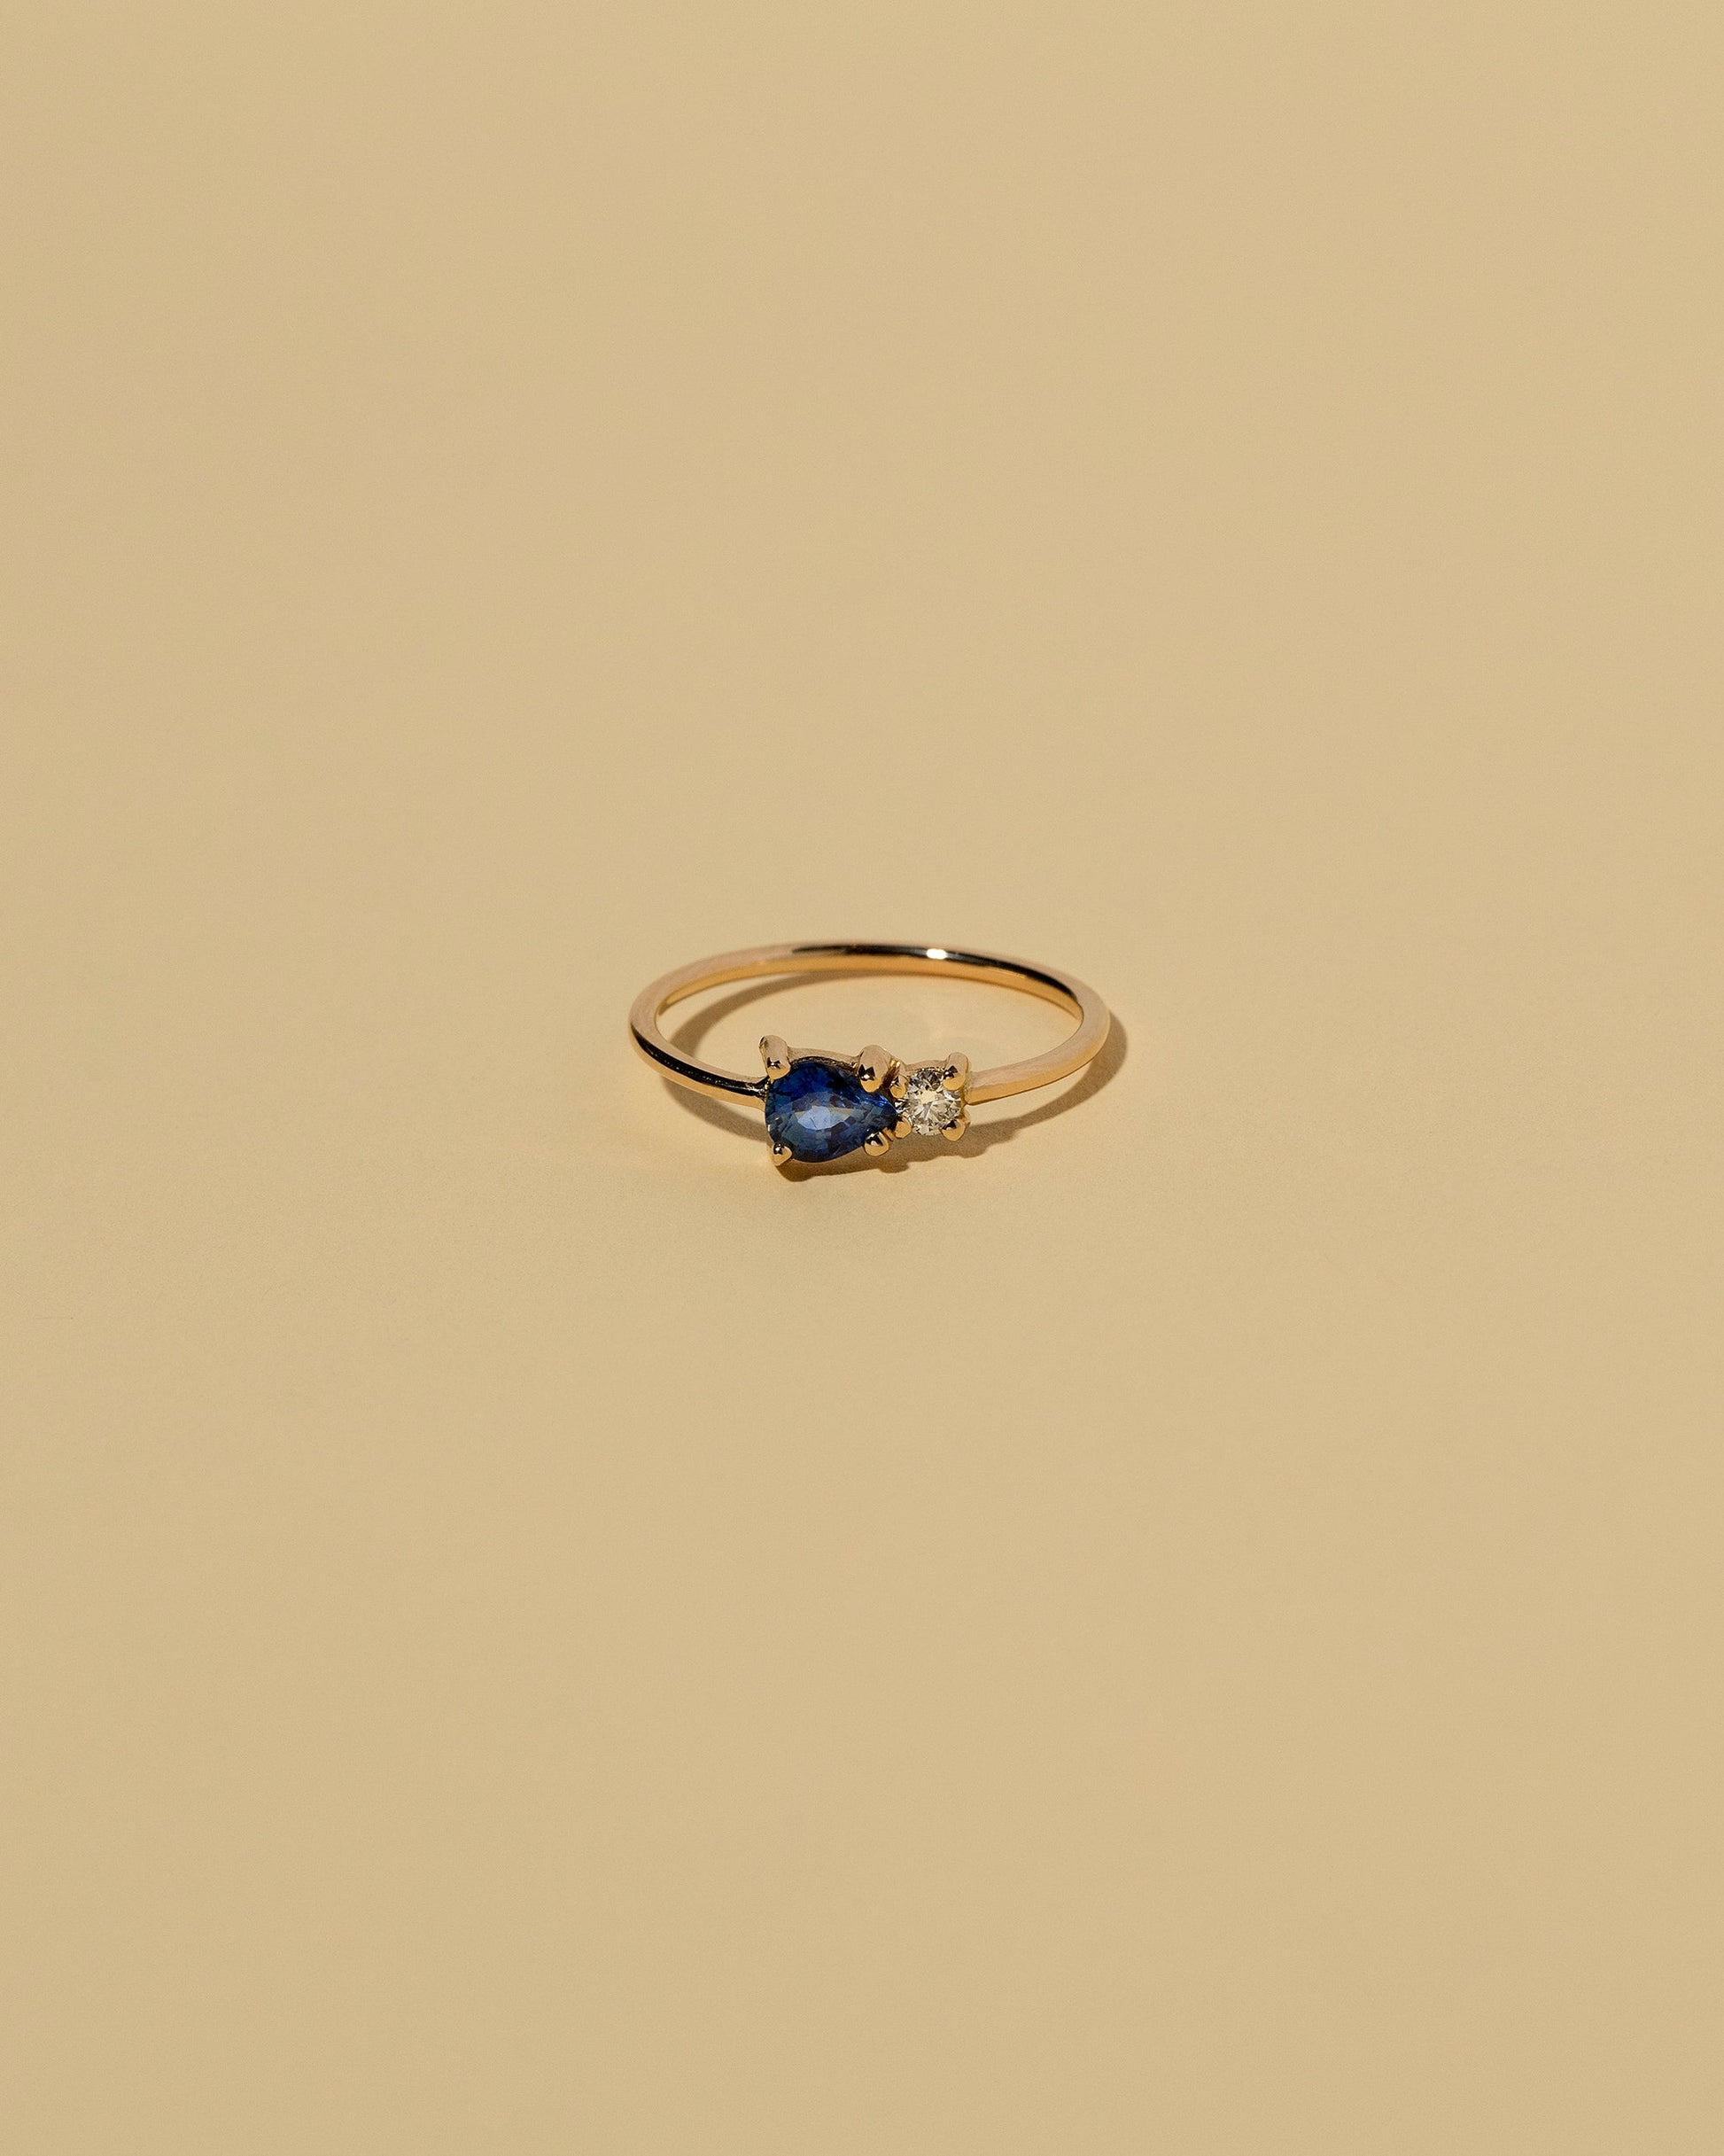  Teardrop Ring - Blue Sapphire on light color background.